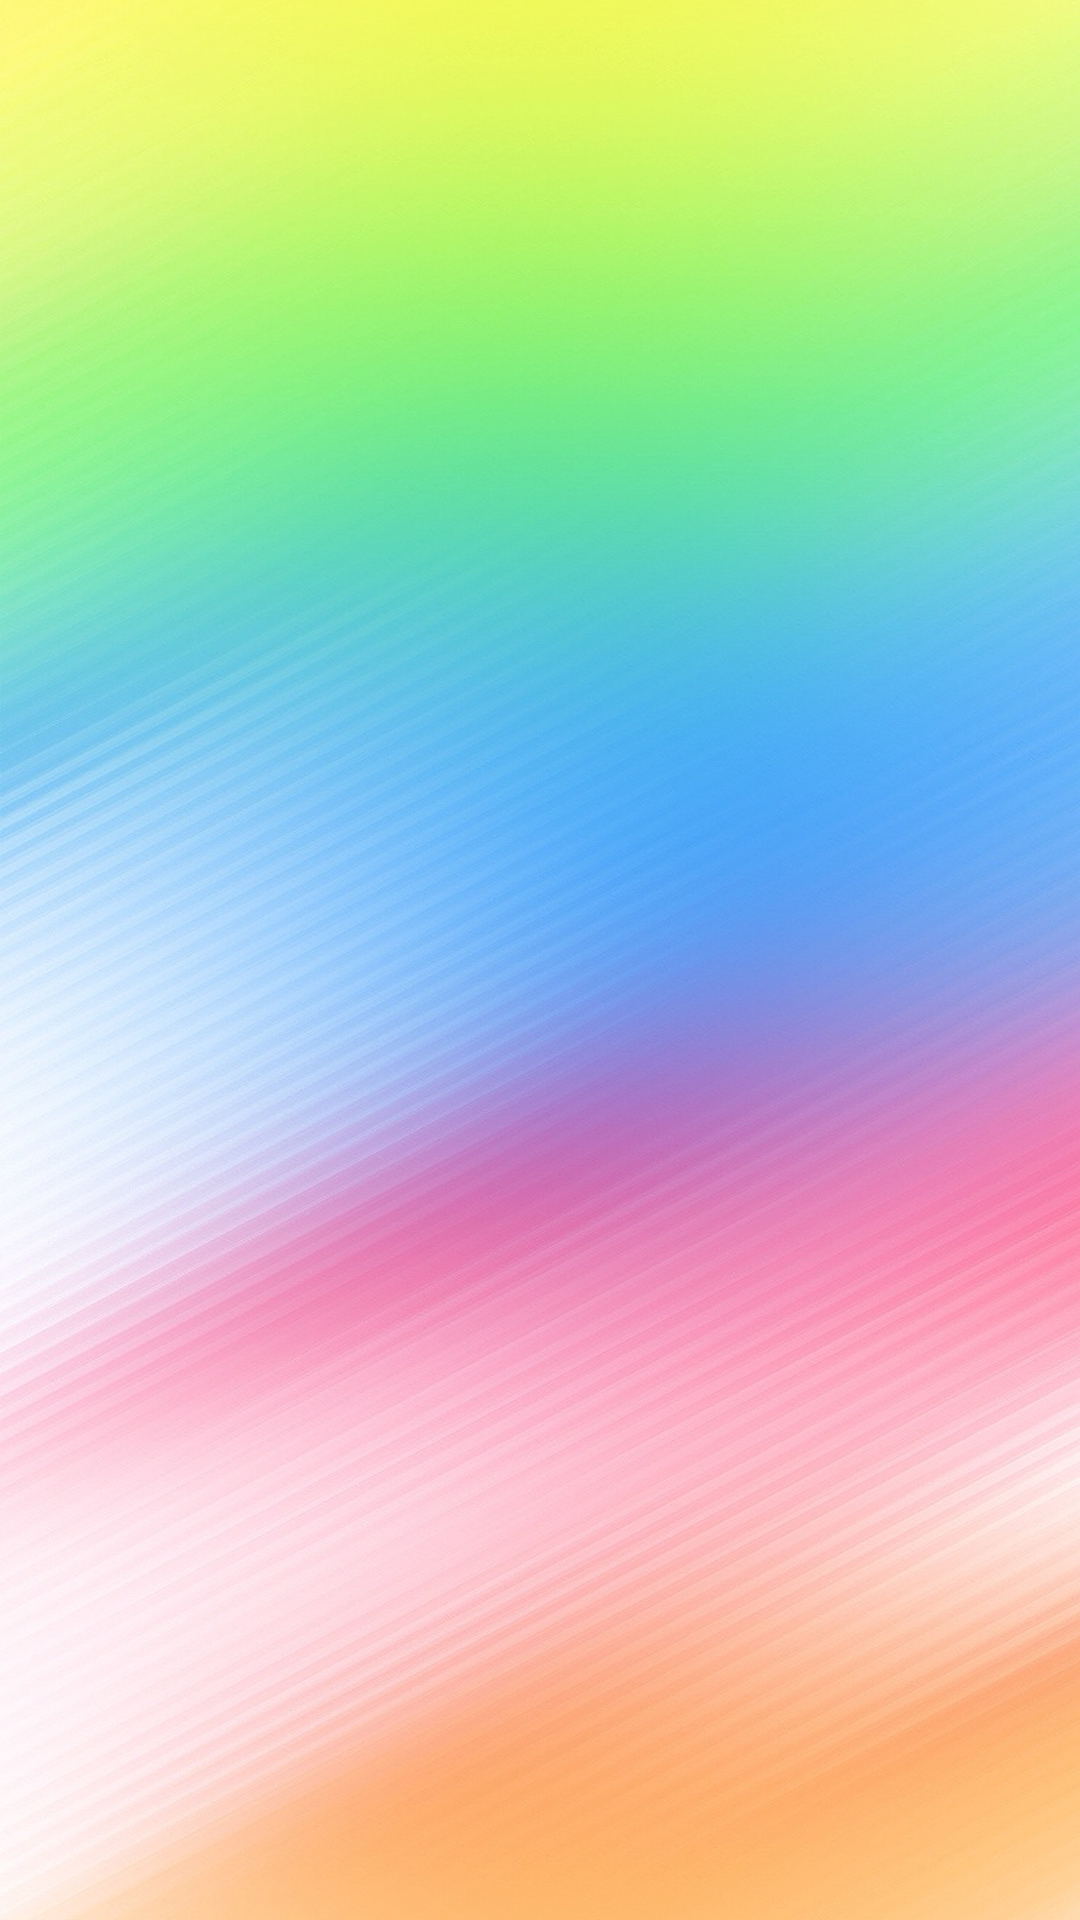 Download iOS 8 Wallpapers for Android